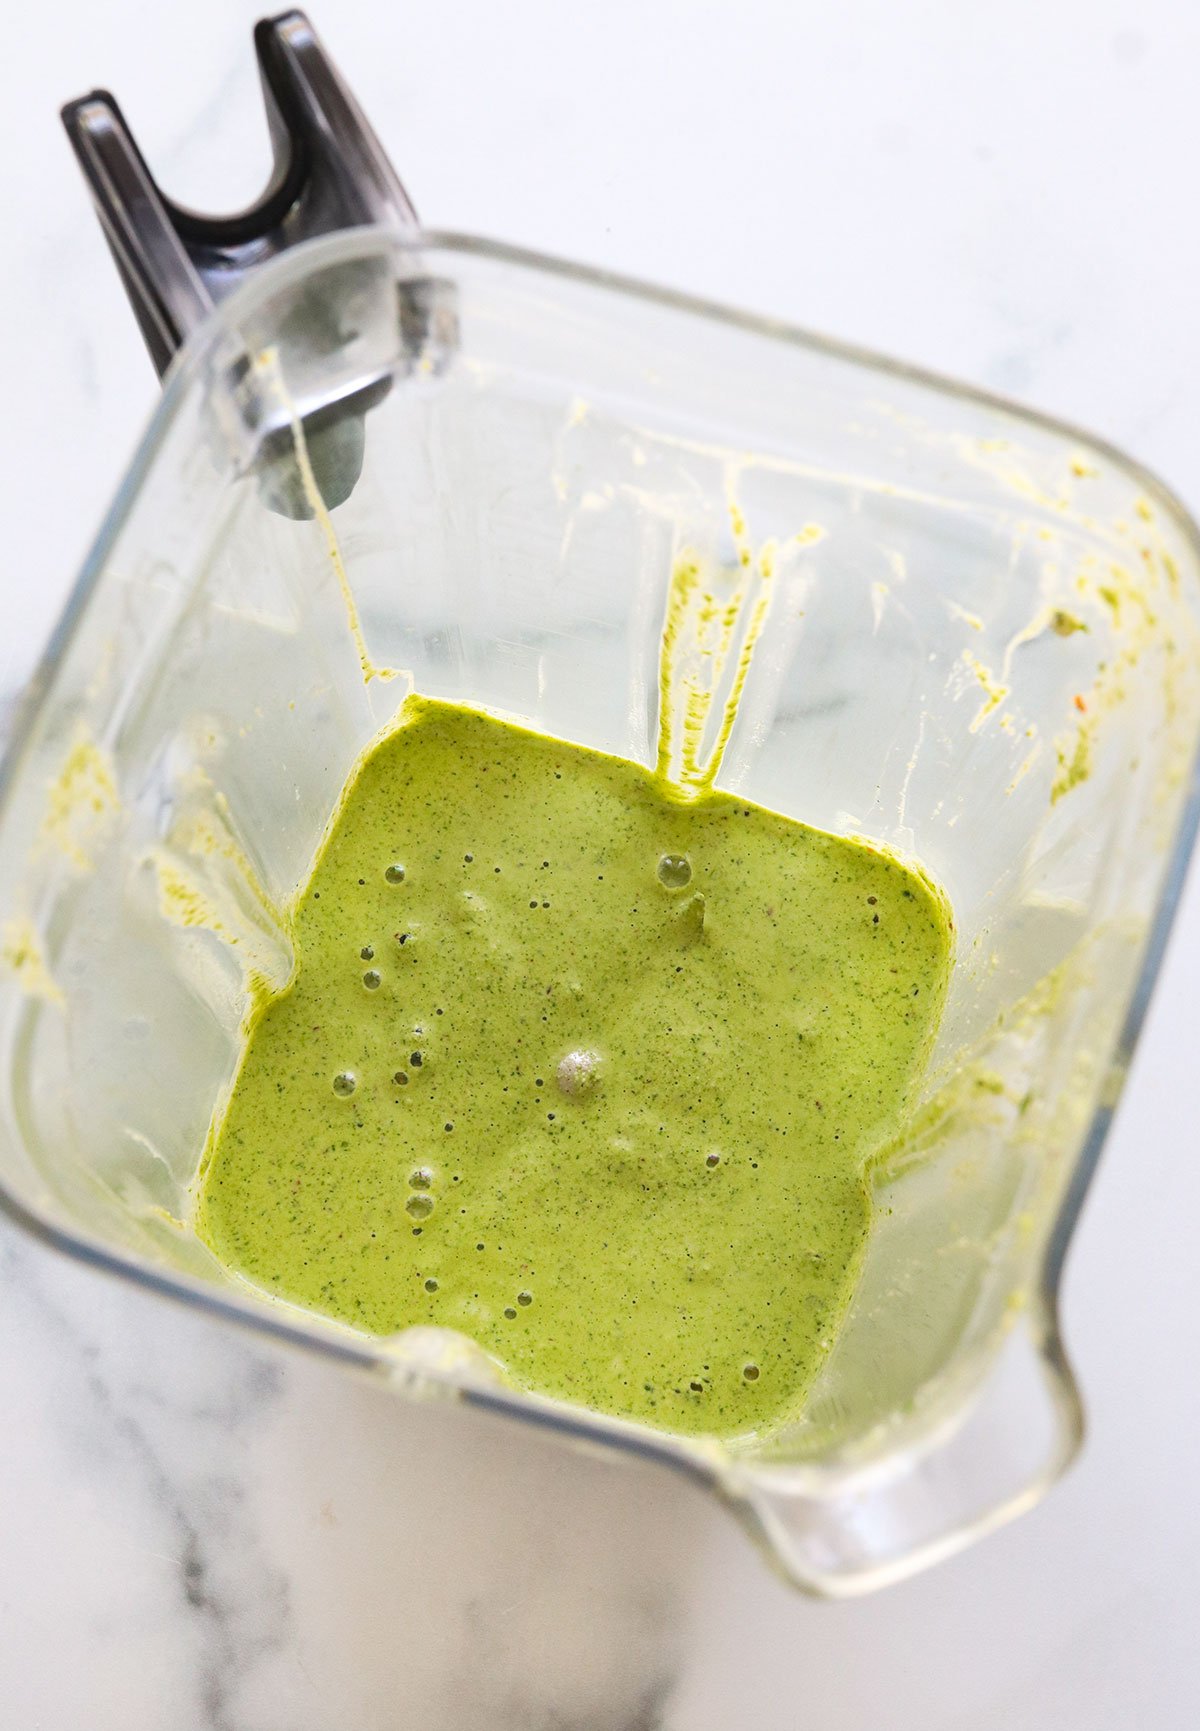 cilantro sauce blended until smooth in pitcher.